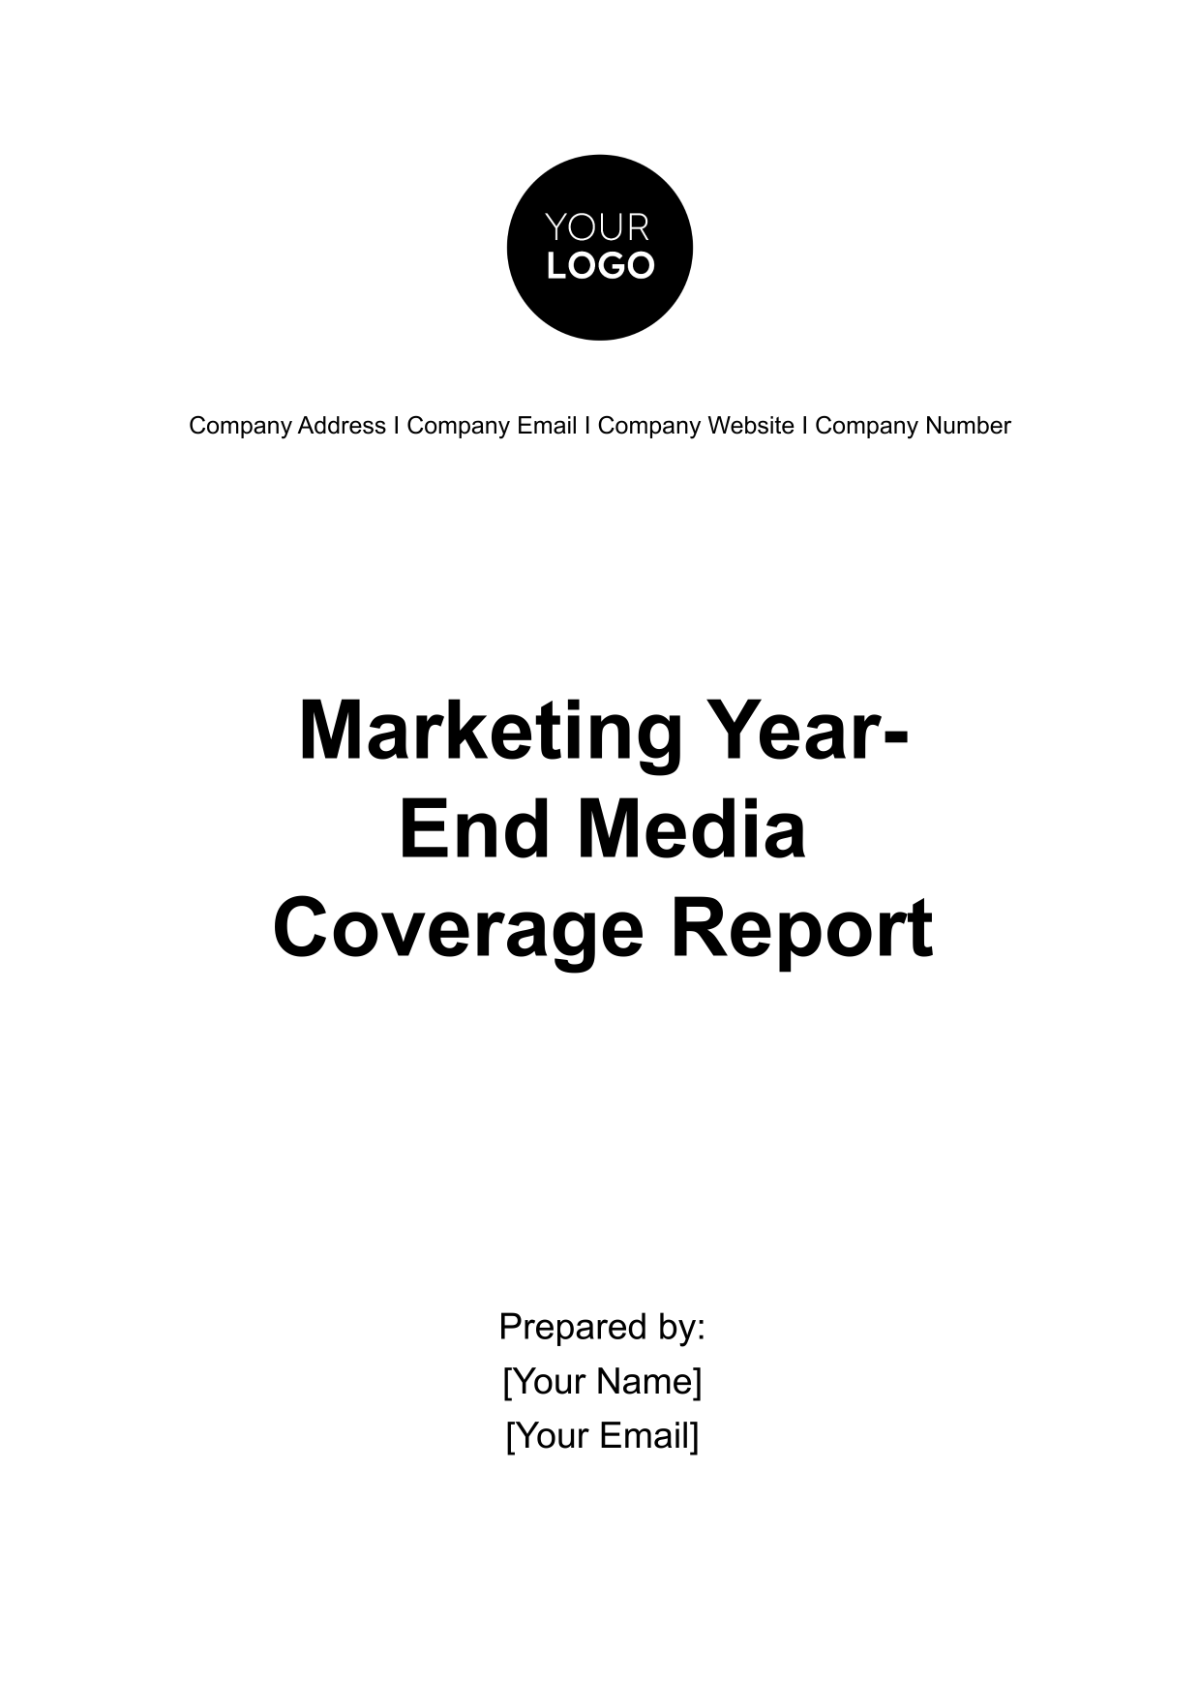 Marketing Year-end Media Coverage Report Template